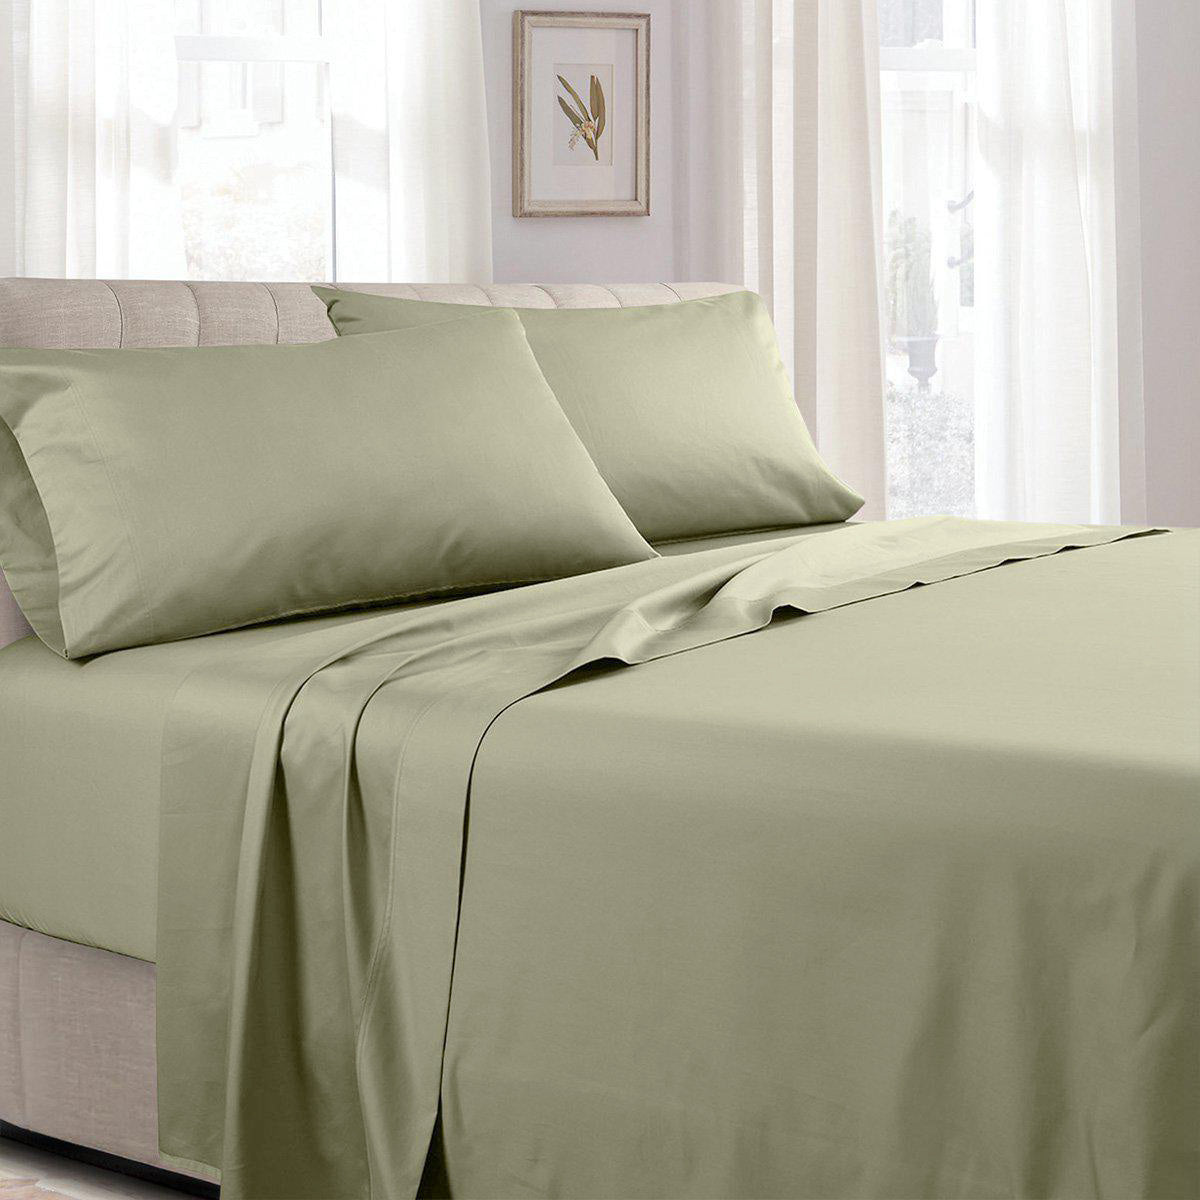 7-10 inches) Low Profile Fitted Sheet Only 650 Thread Count Solid